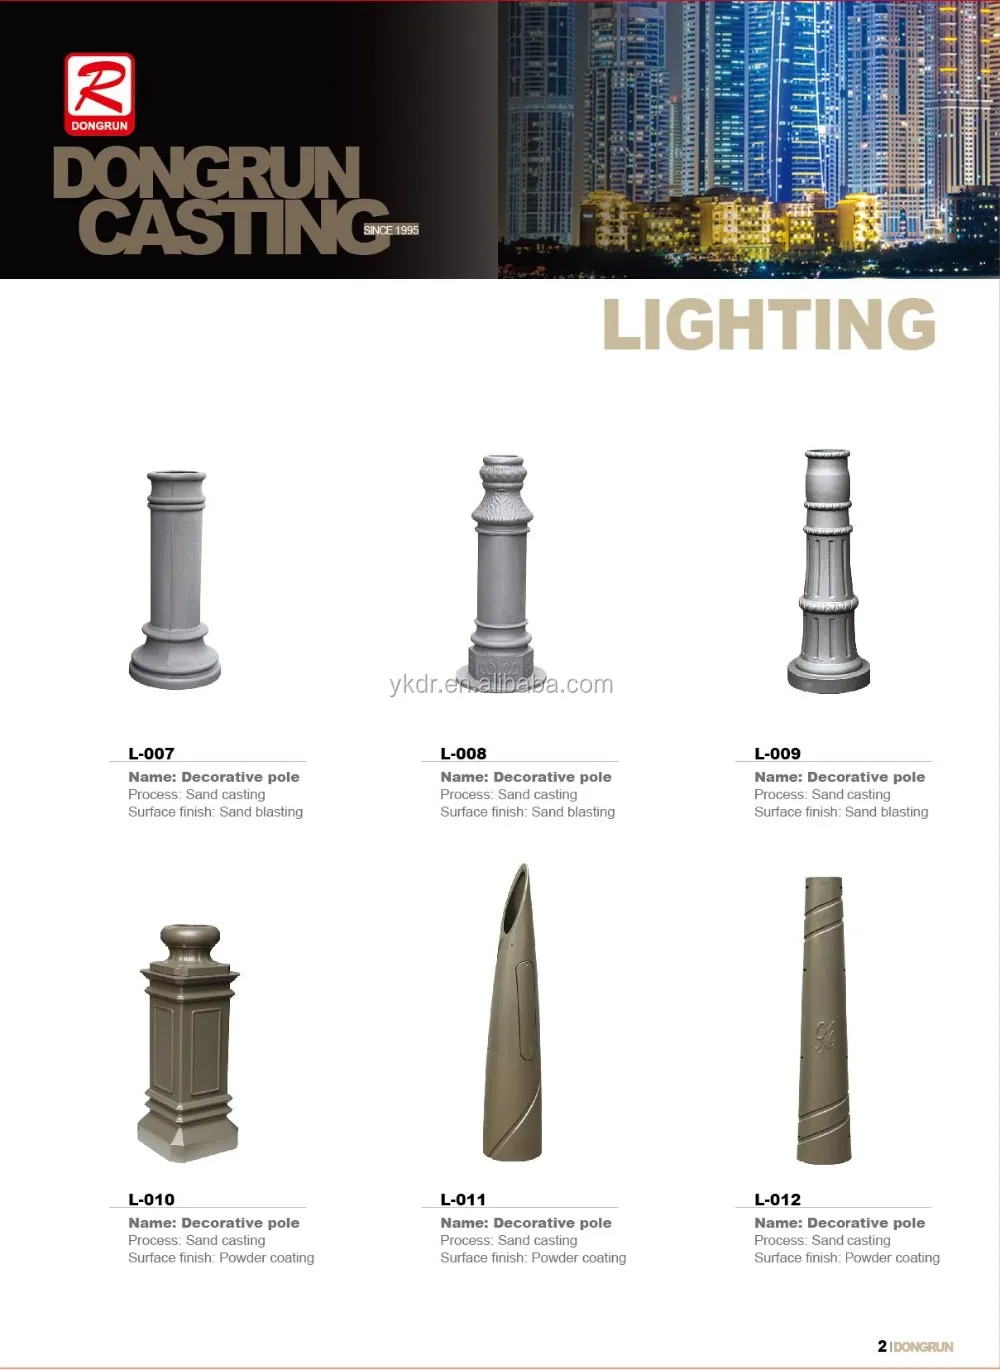 China OEM manufacture supply sand casting decorative poles and arms with high quality